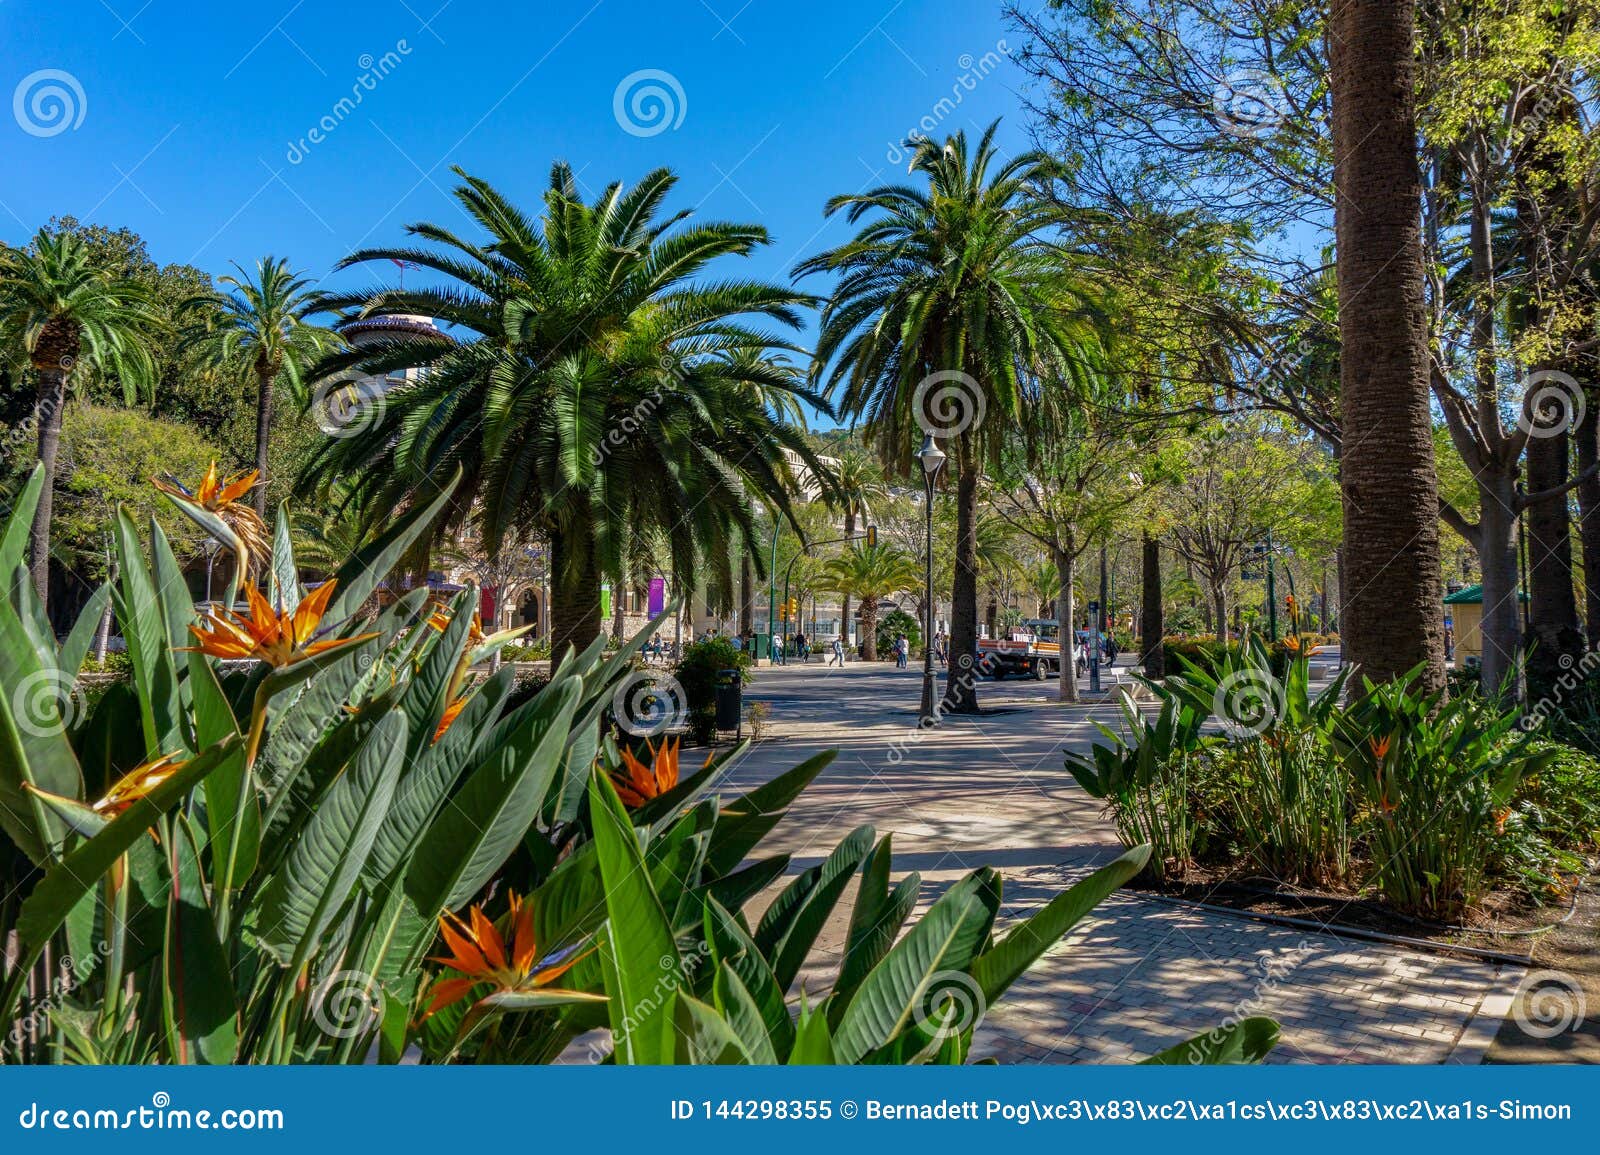 Sidewalk On The Paseo Del Parque In Malaga, Spain With Palm Trees ...